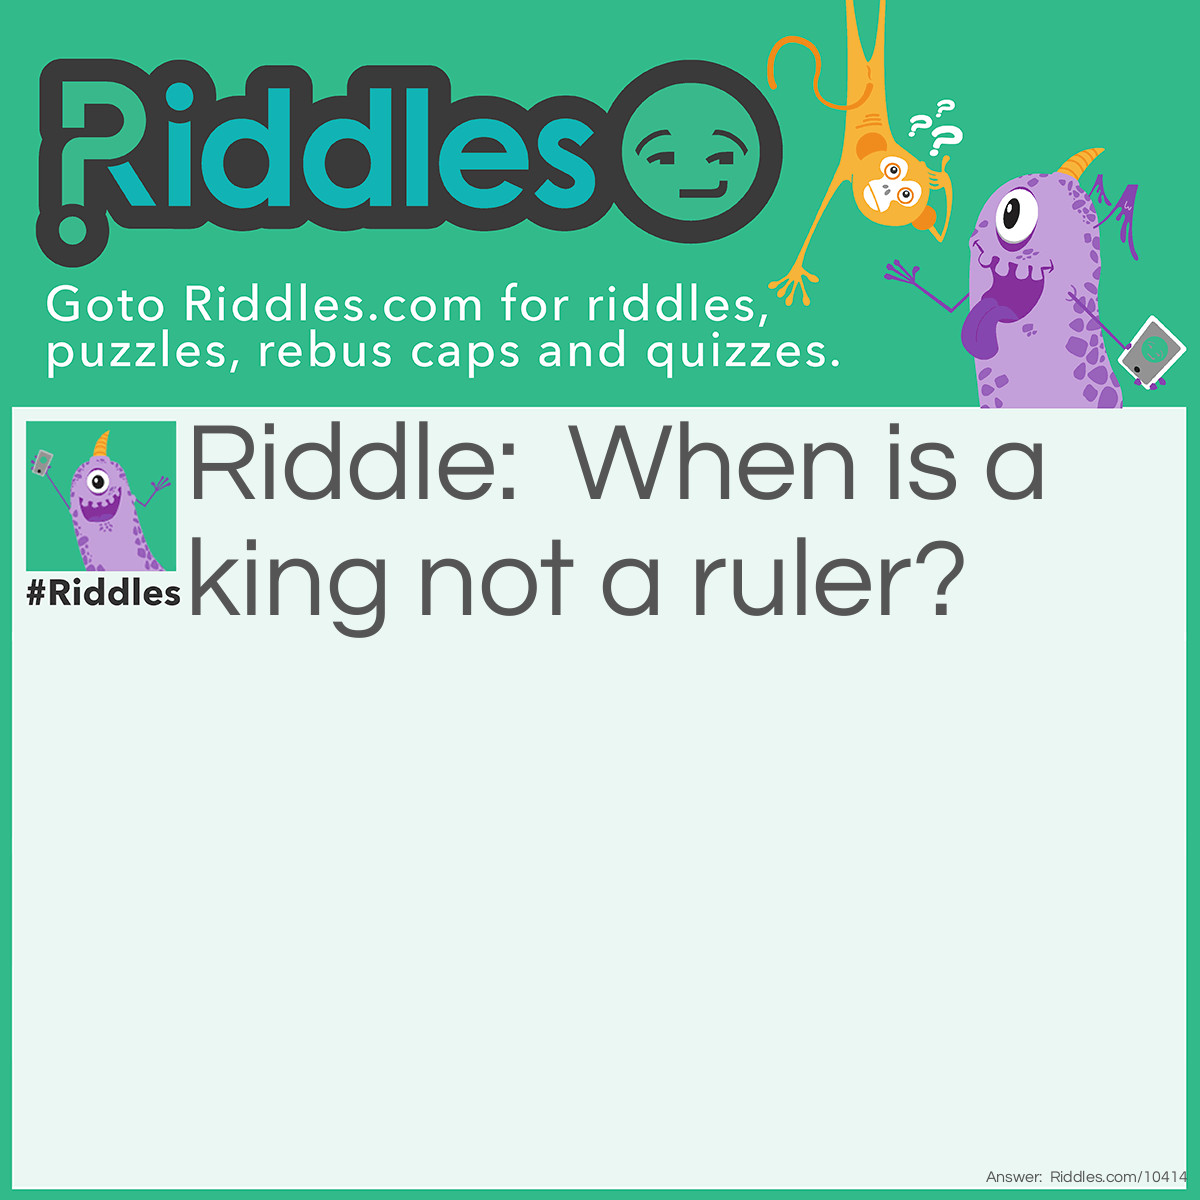 Riddle: When is a king not a ruler? Answer: When it's a value on a playing card